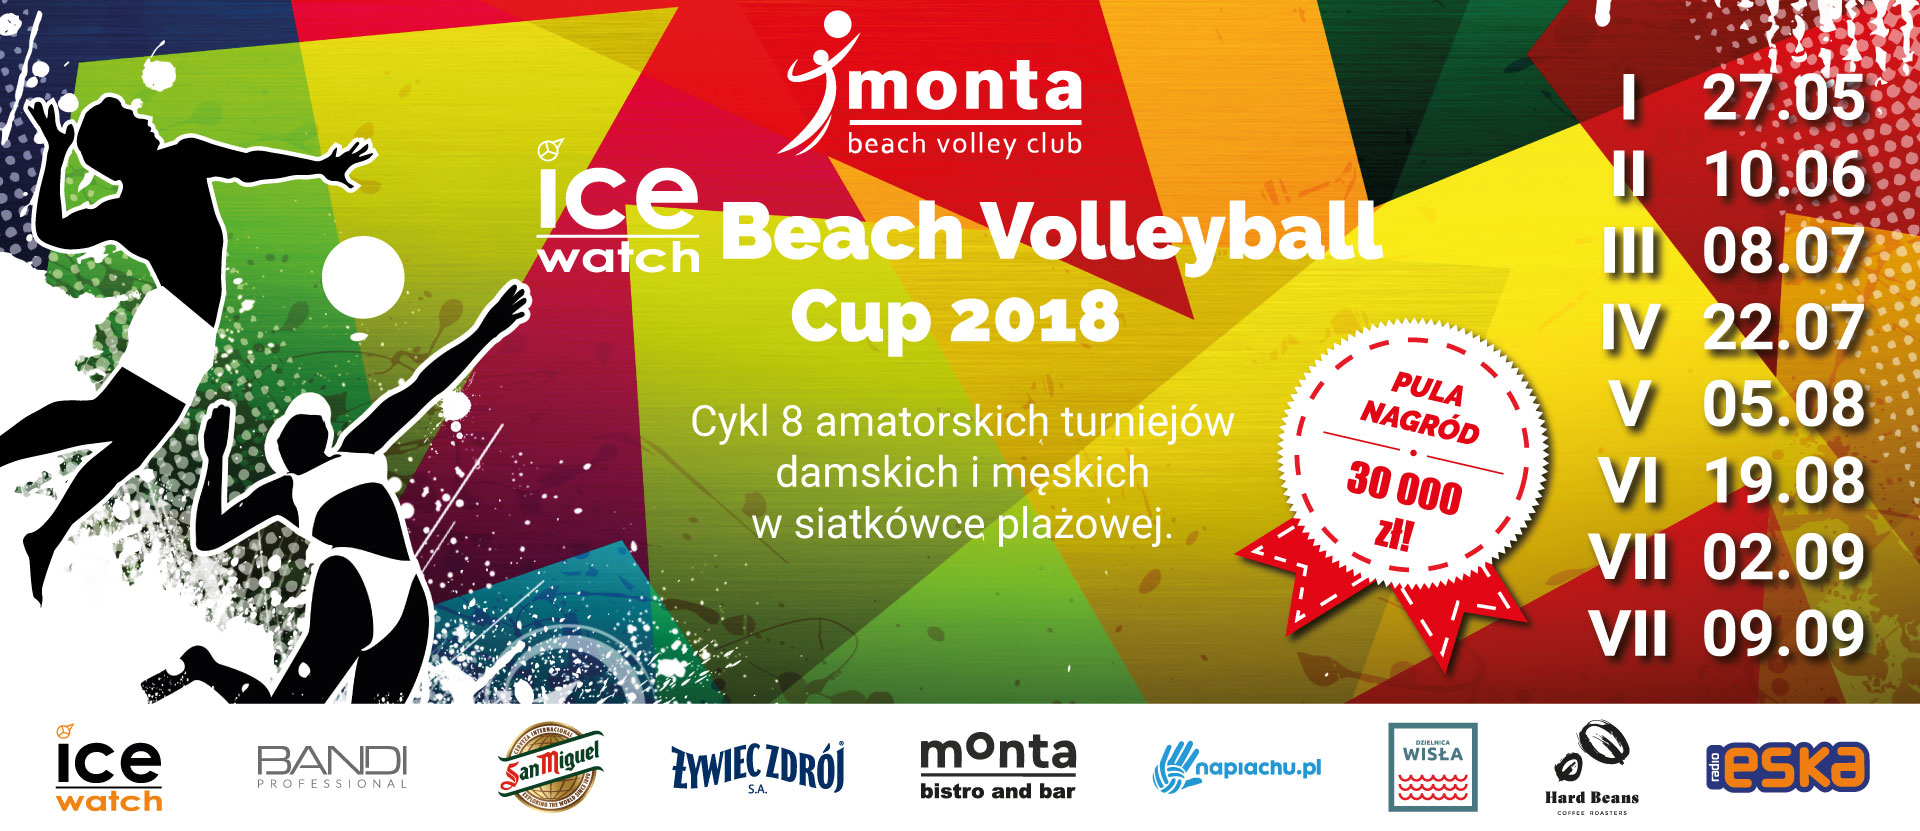 ICE-WATCH BEACH VOLLEYBALL CUP 2018